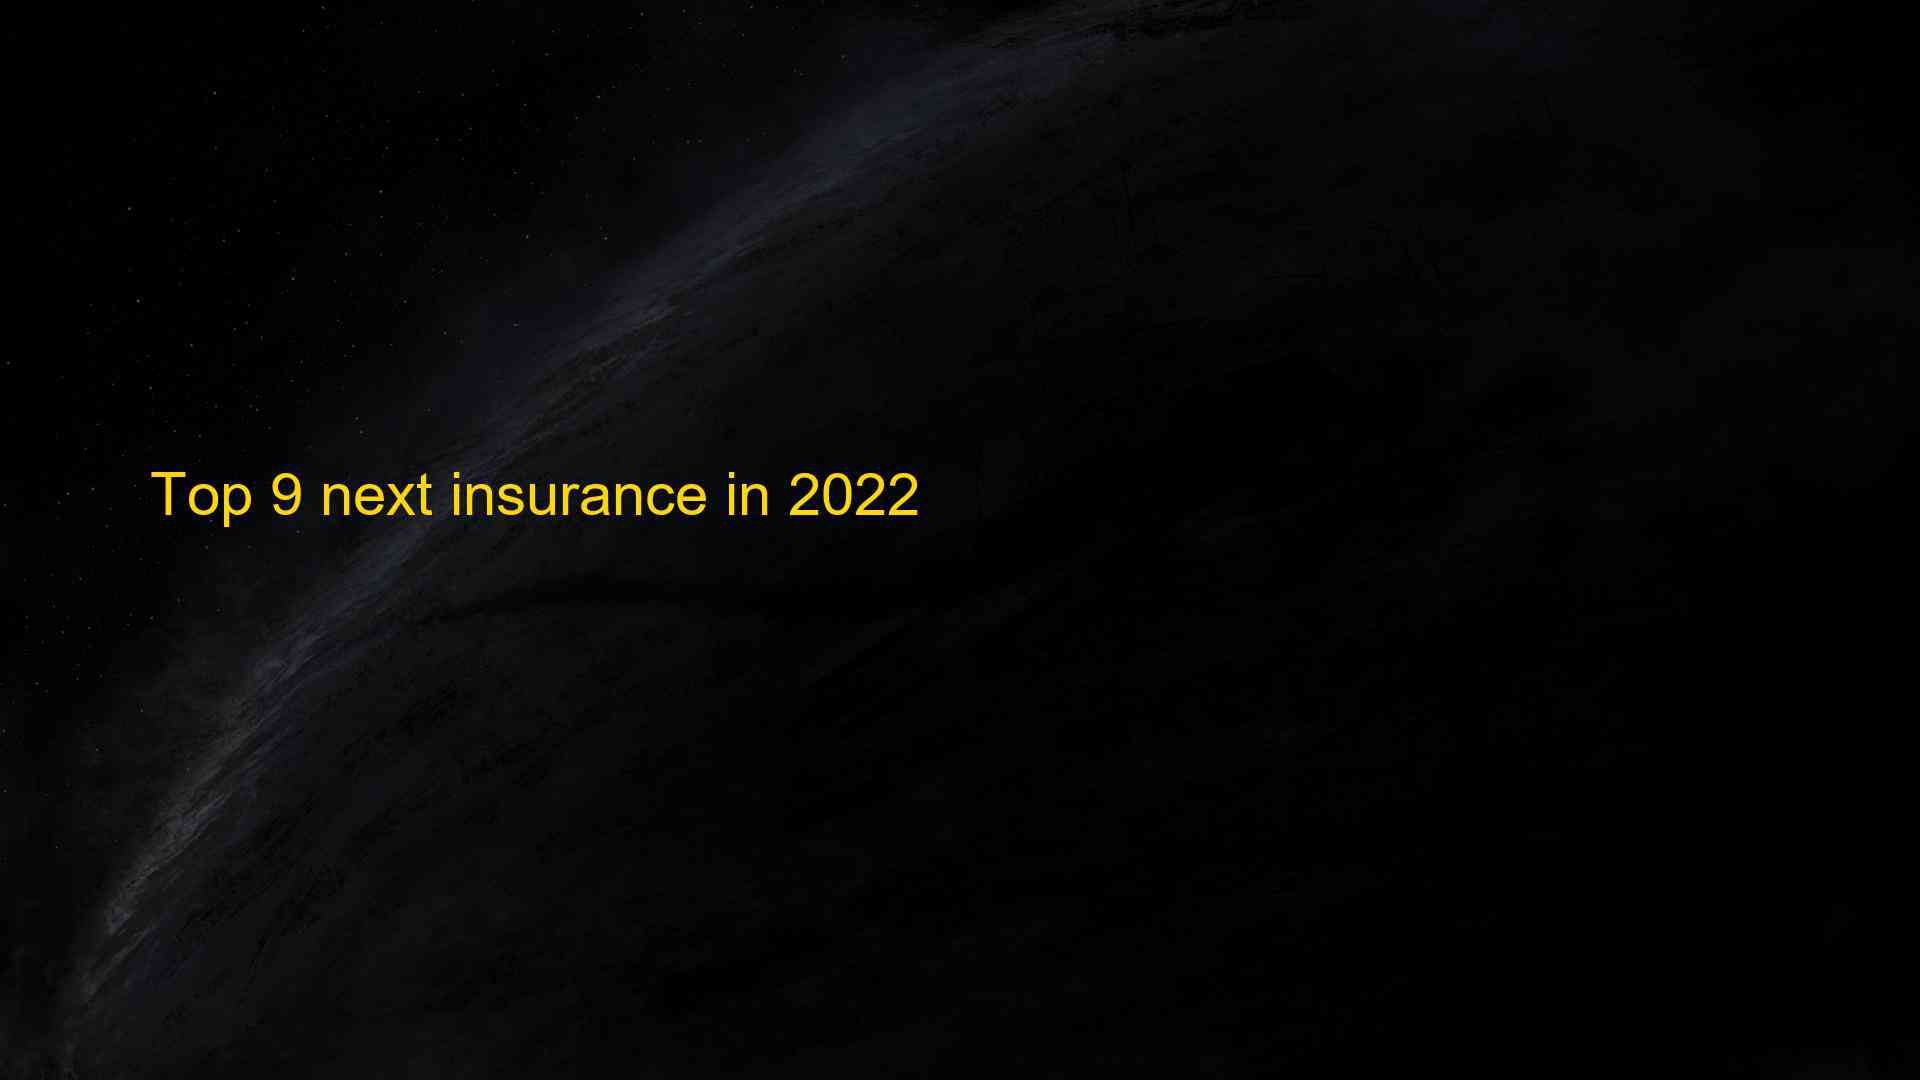 Top 9 next insurance in 2022 1660263474